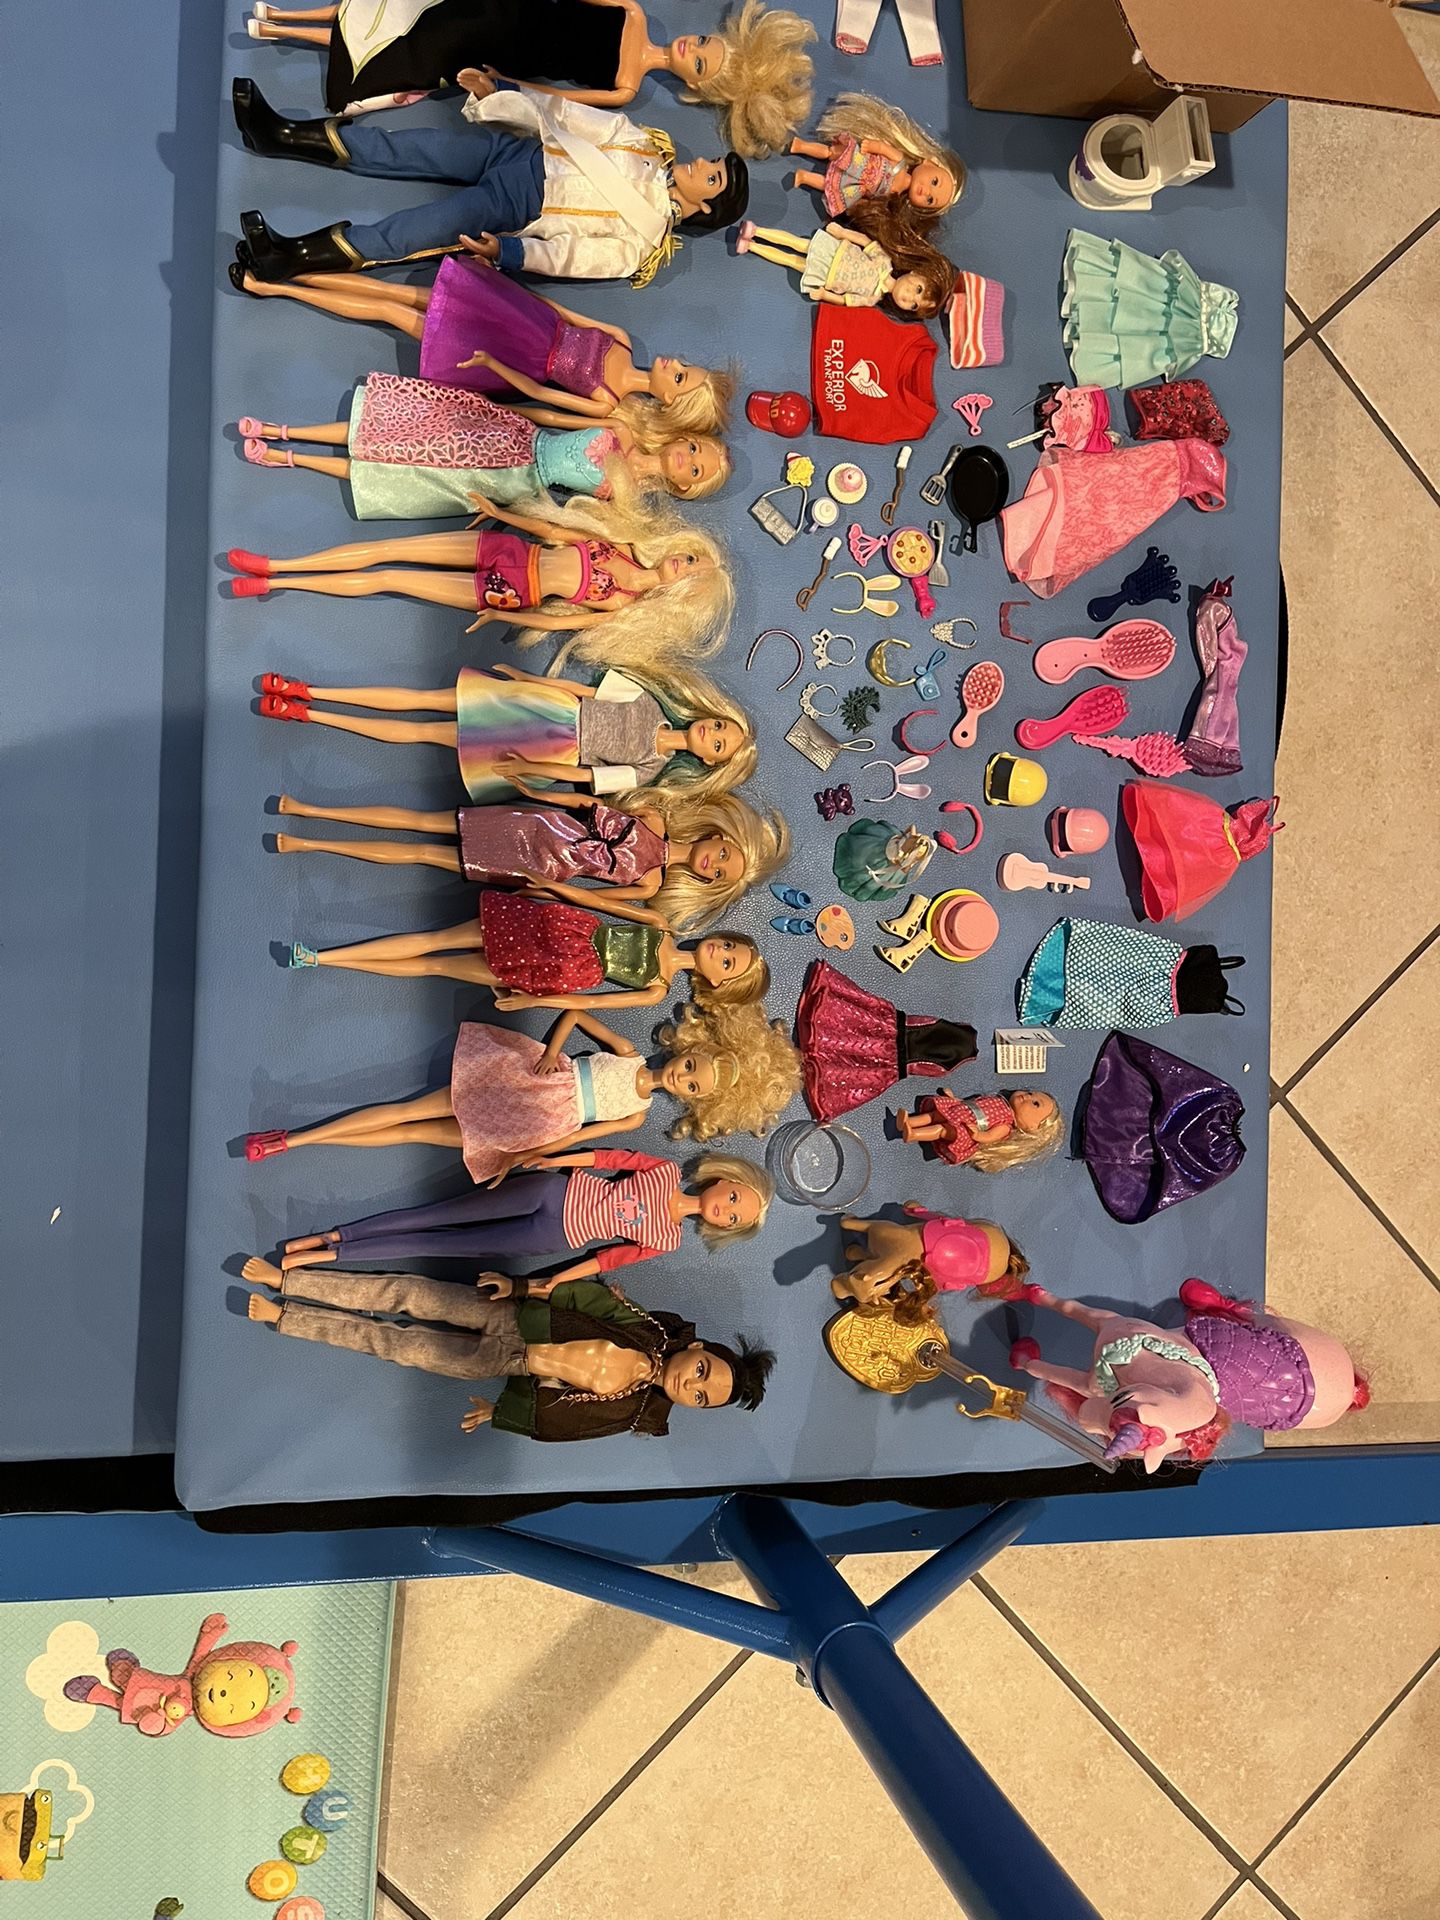 Barbie dolls and Barbie toys